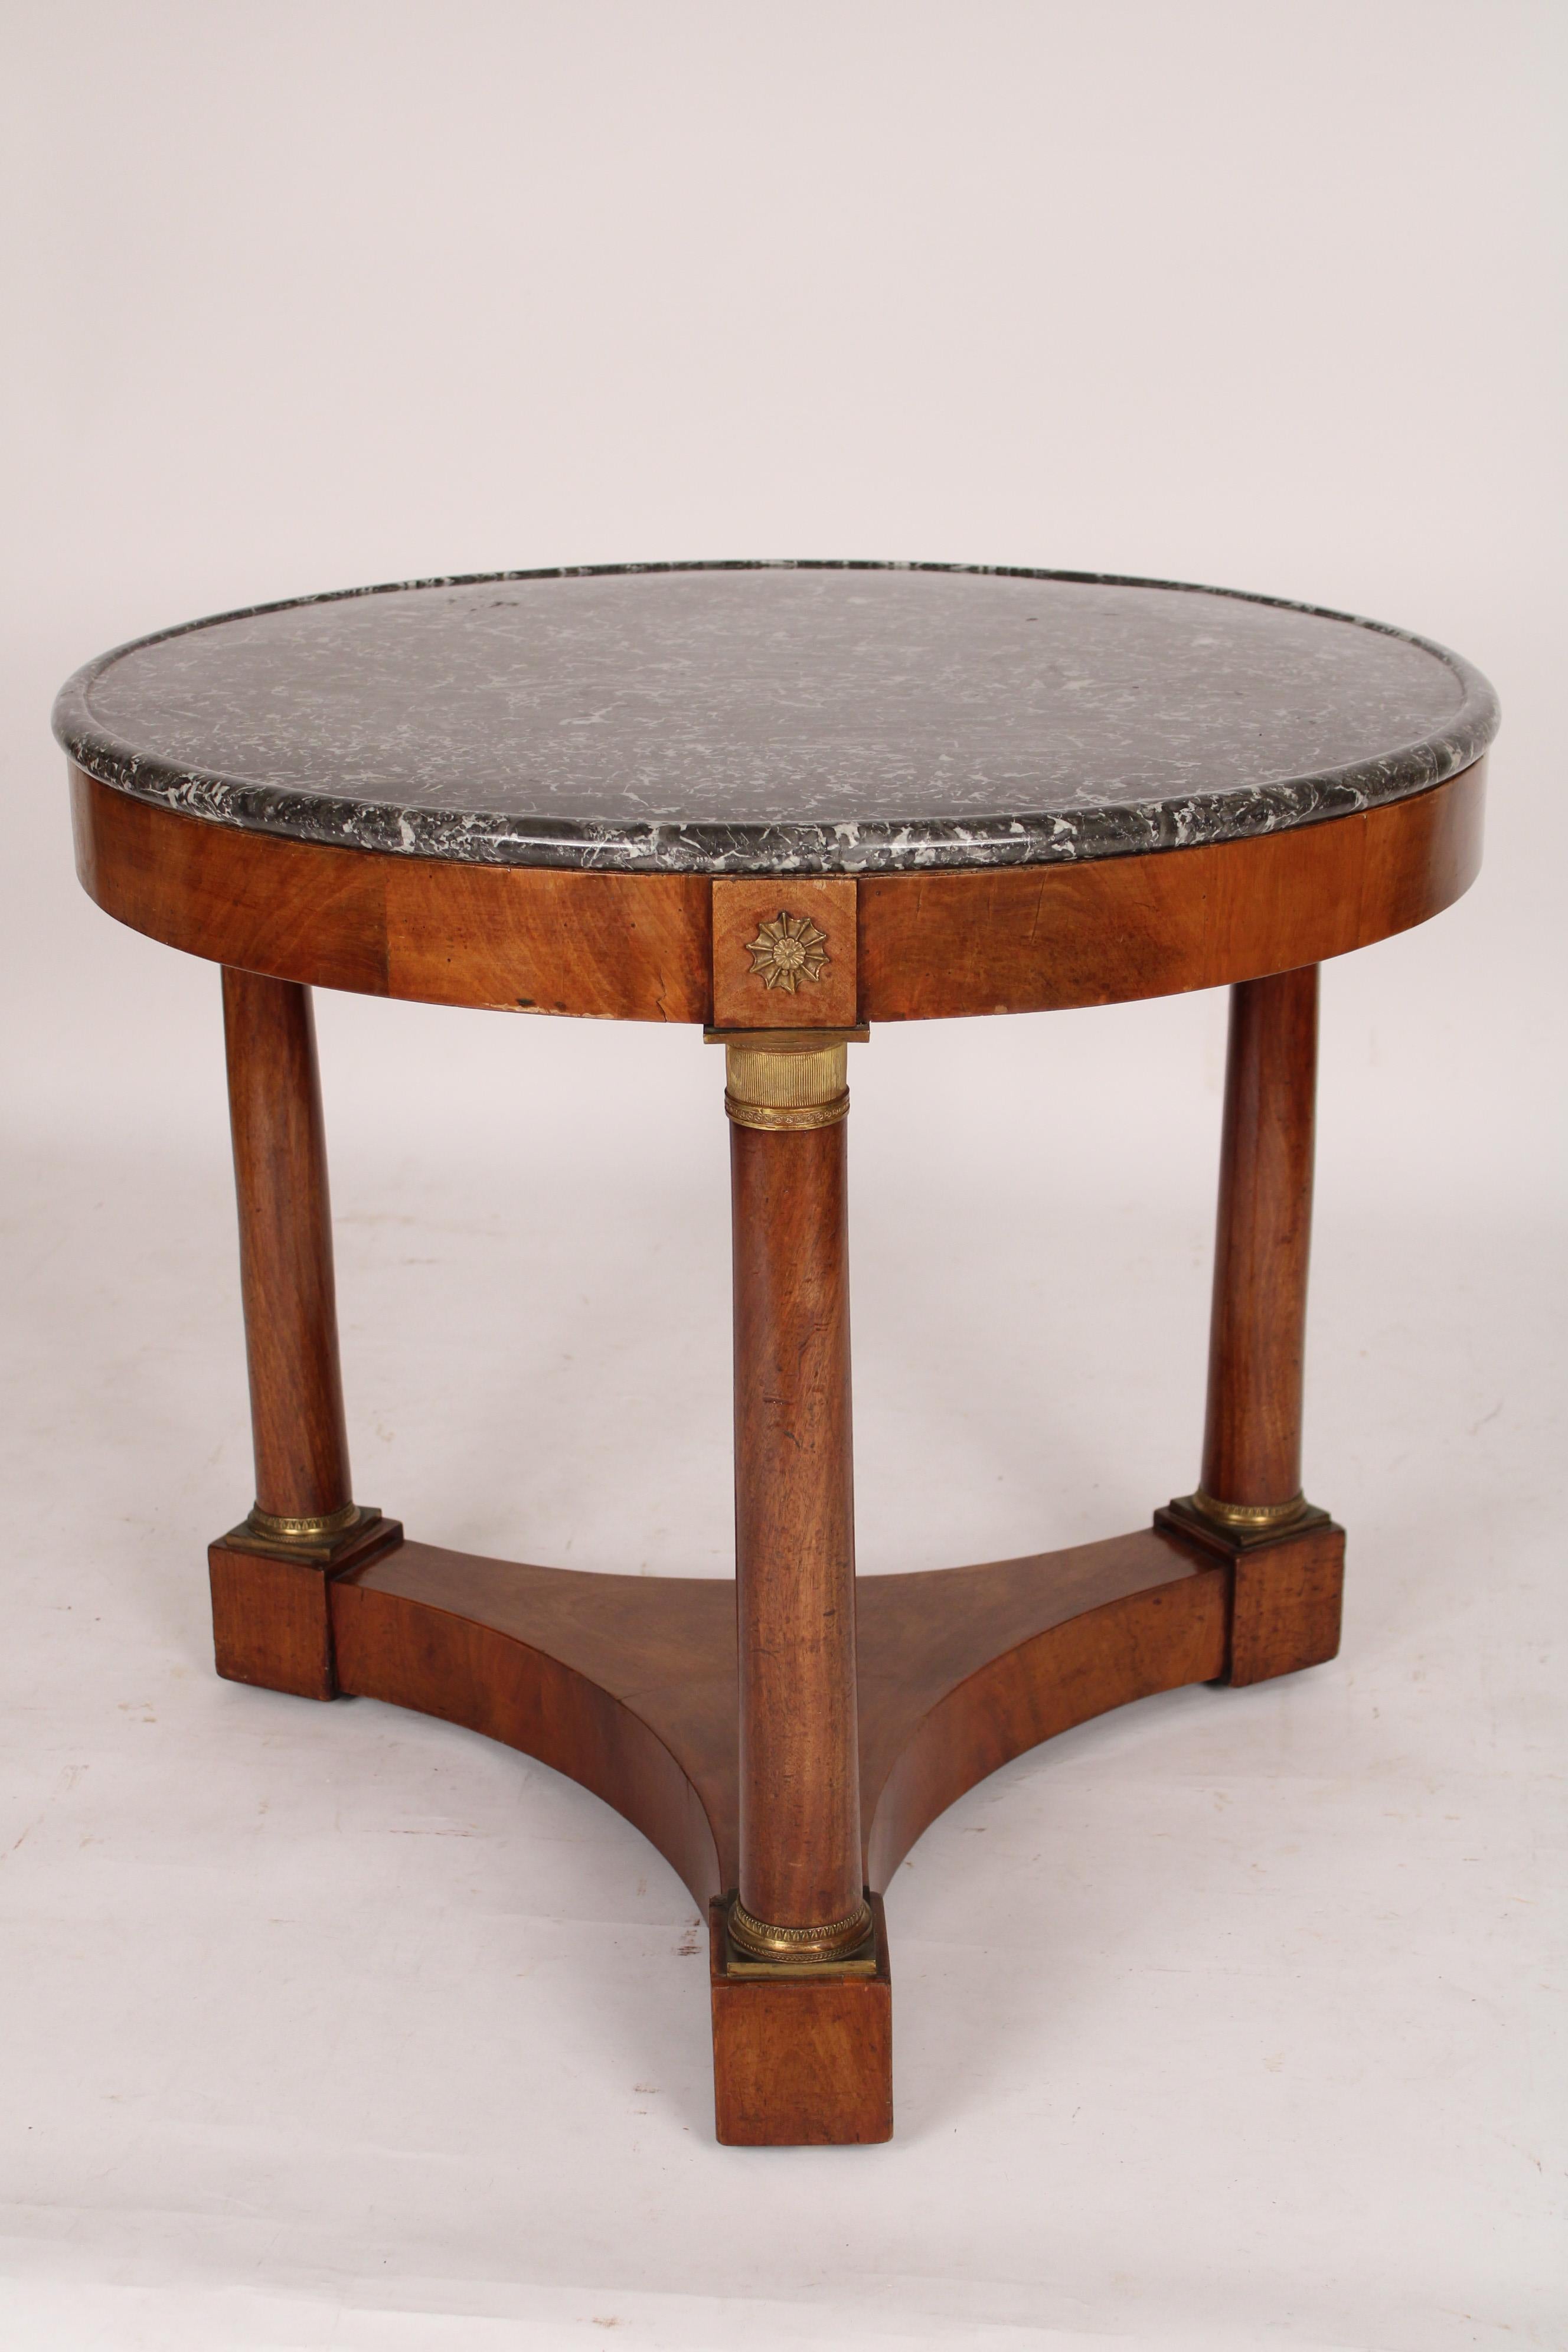 Antique Empire style mahogany center table with marble top, 19th century. With a grey and white marble top with grooved rim, flame mahogany frieze, columns with gilt bronze mounts resting on a mahogany base.